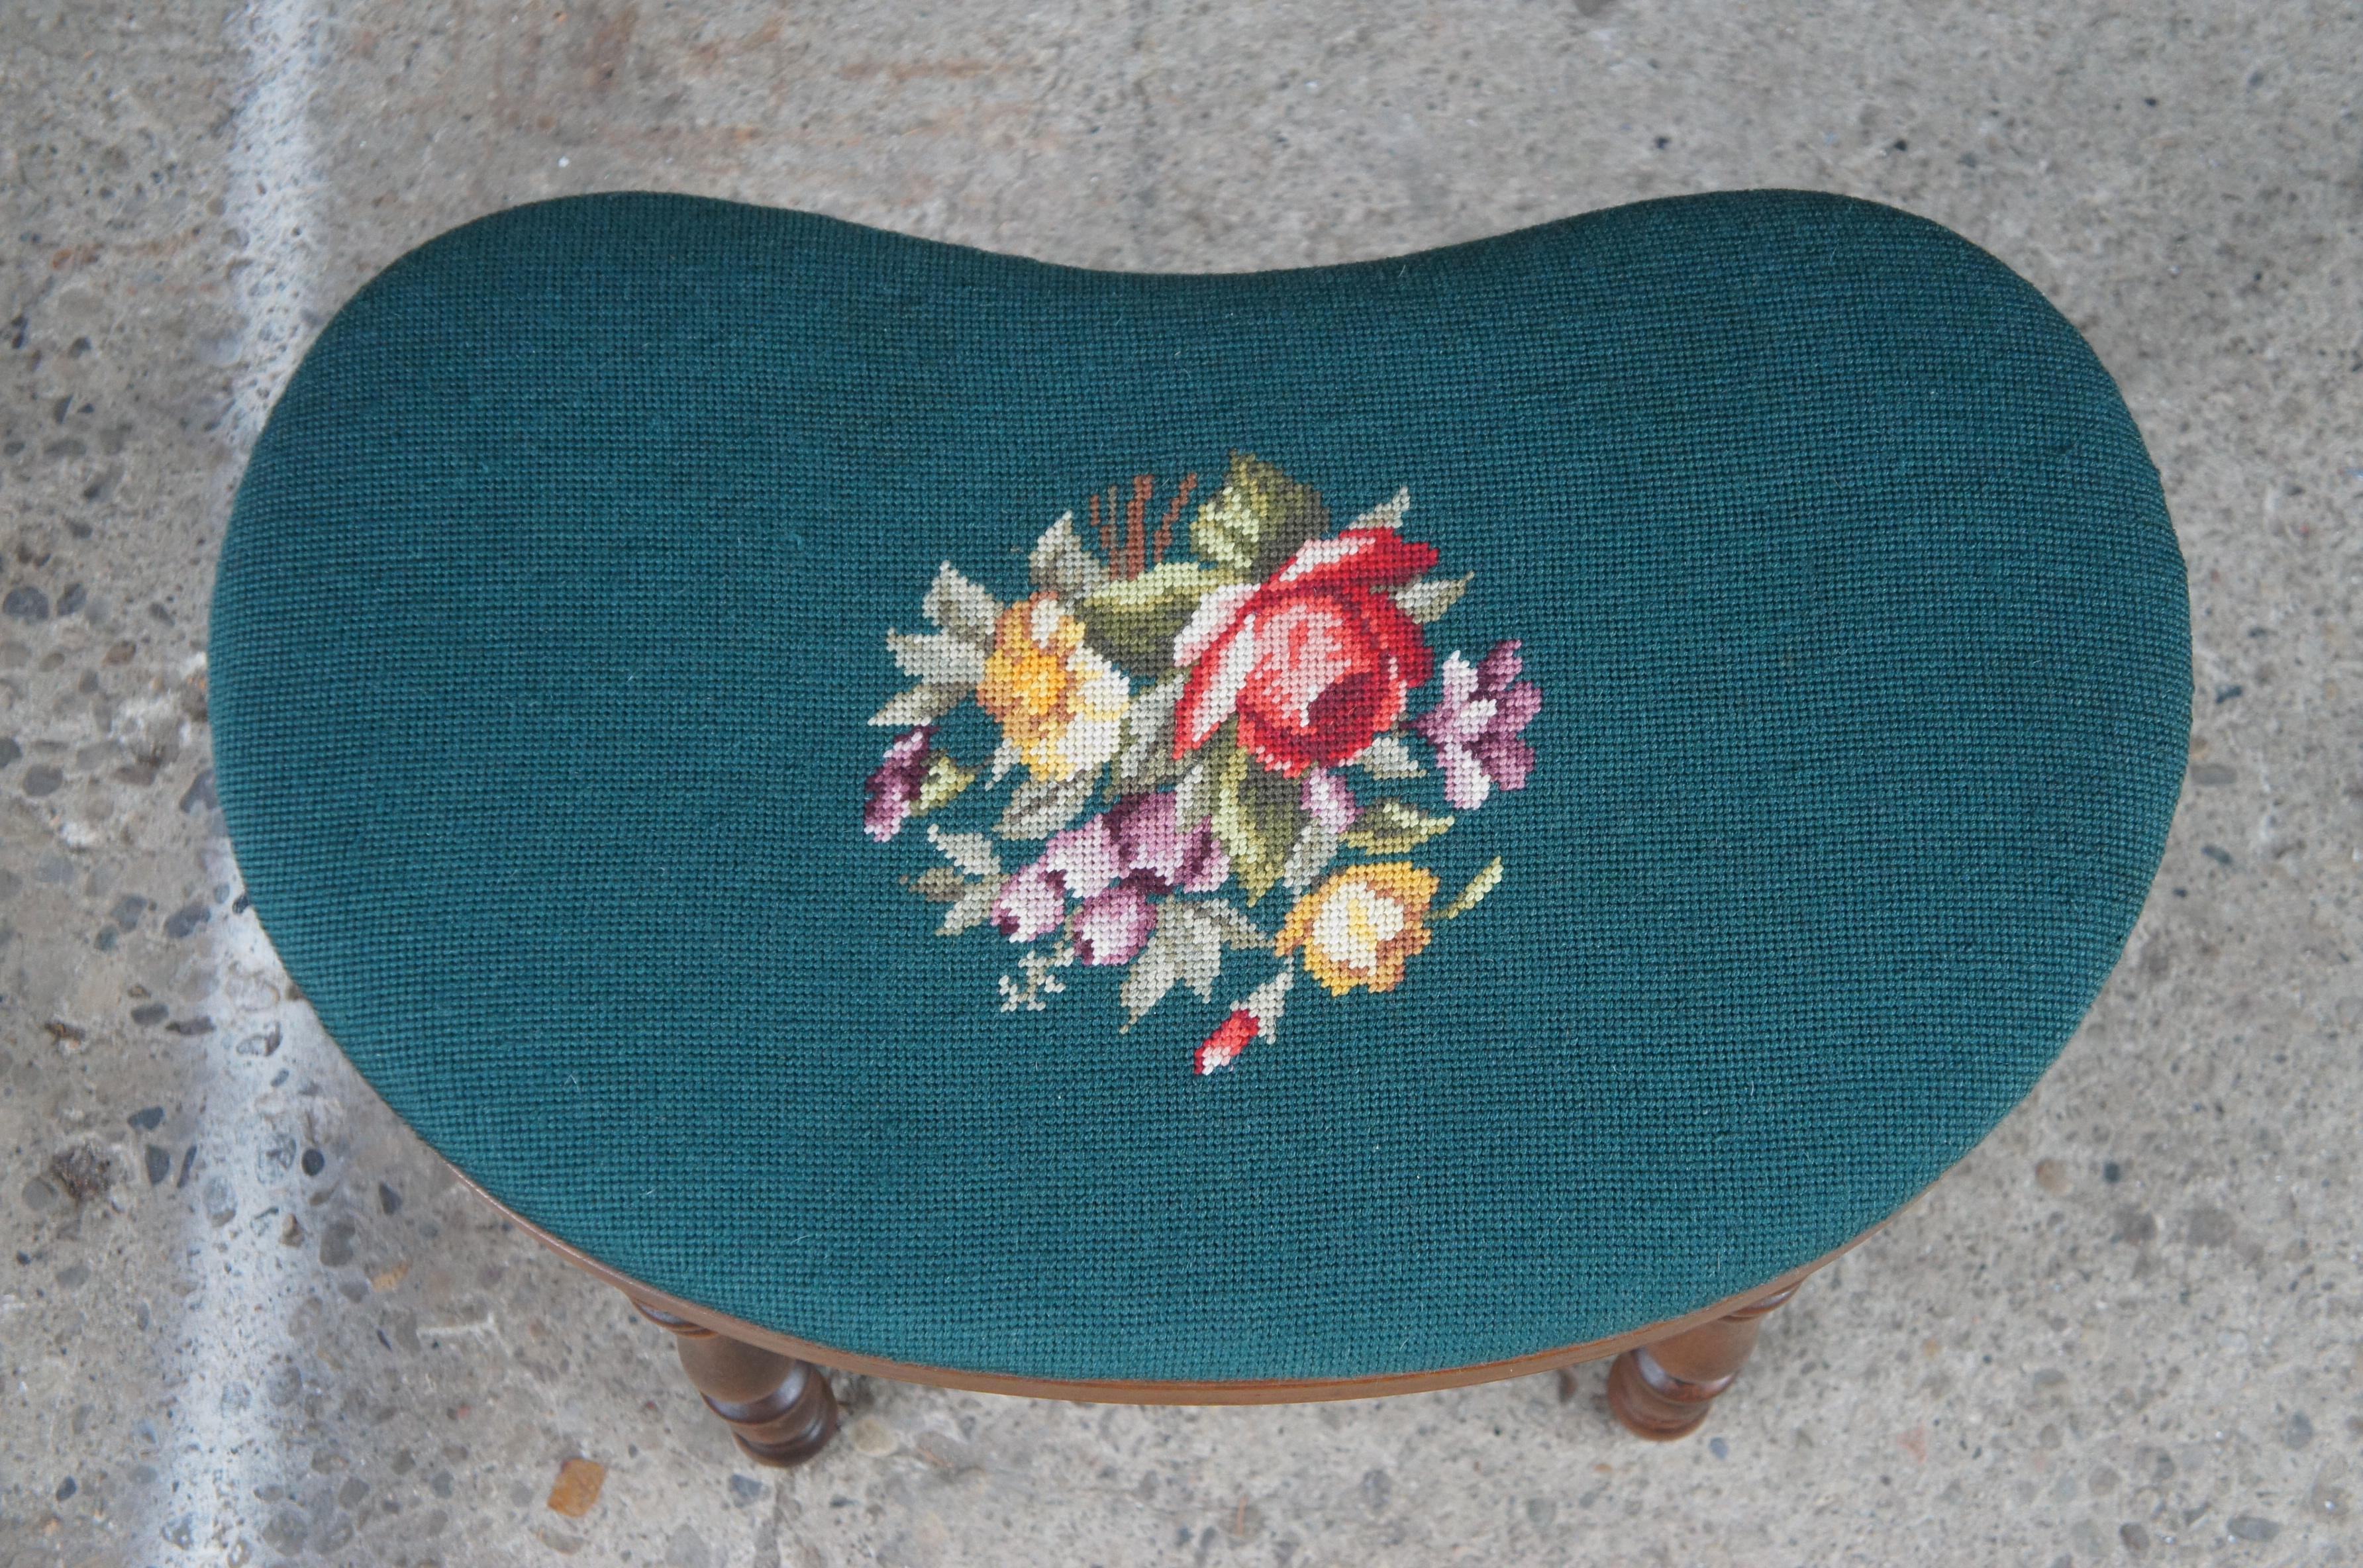 Mid Century Kidney Bean Green Floral Embroidered Foot Stool Piano Bench Ottoman (Textil) im Angebot